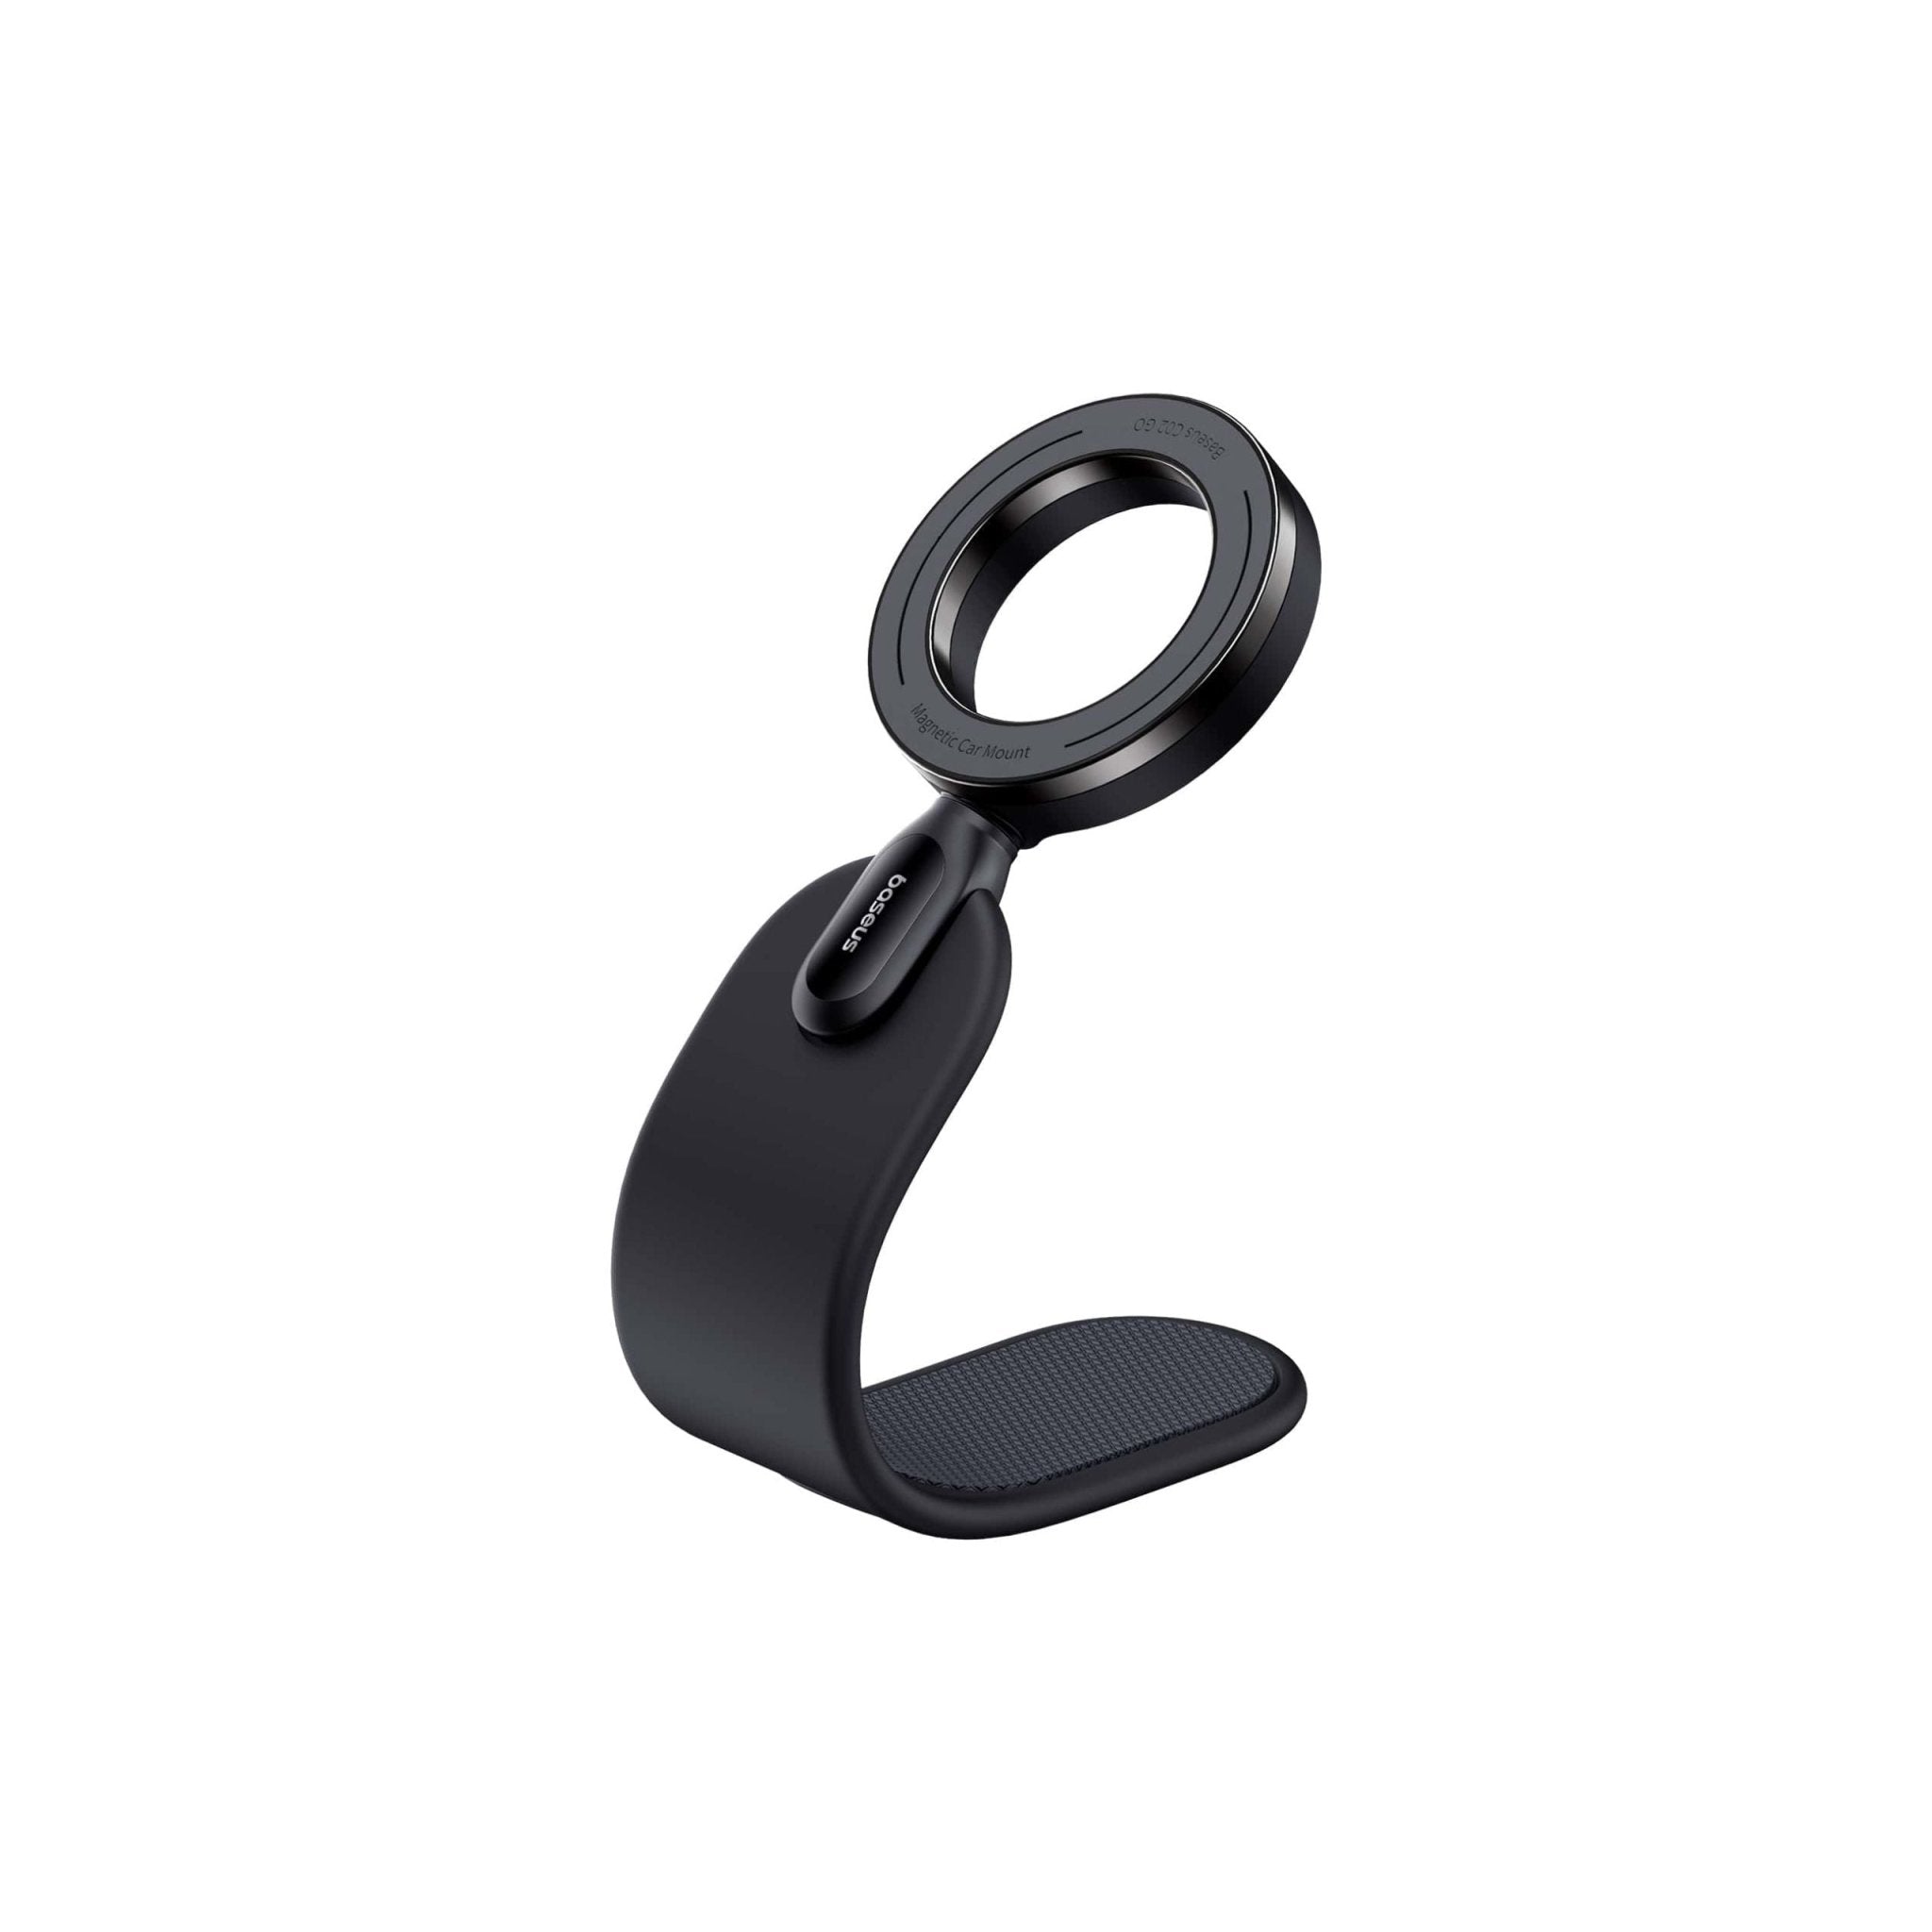 Lanparte Magsafe MagnetIc Mount Suction Cup Phone Holder Car